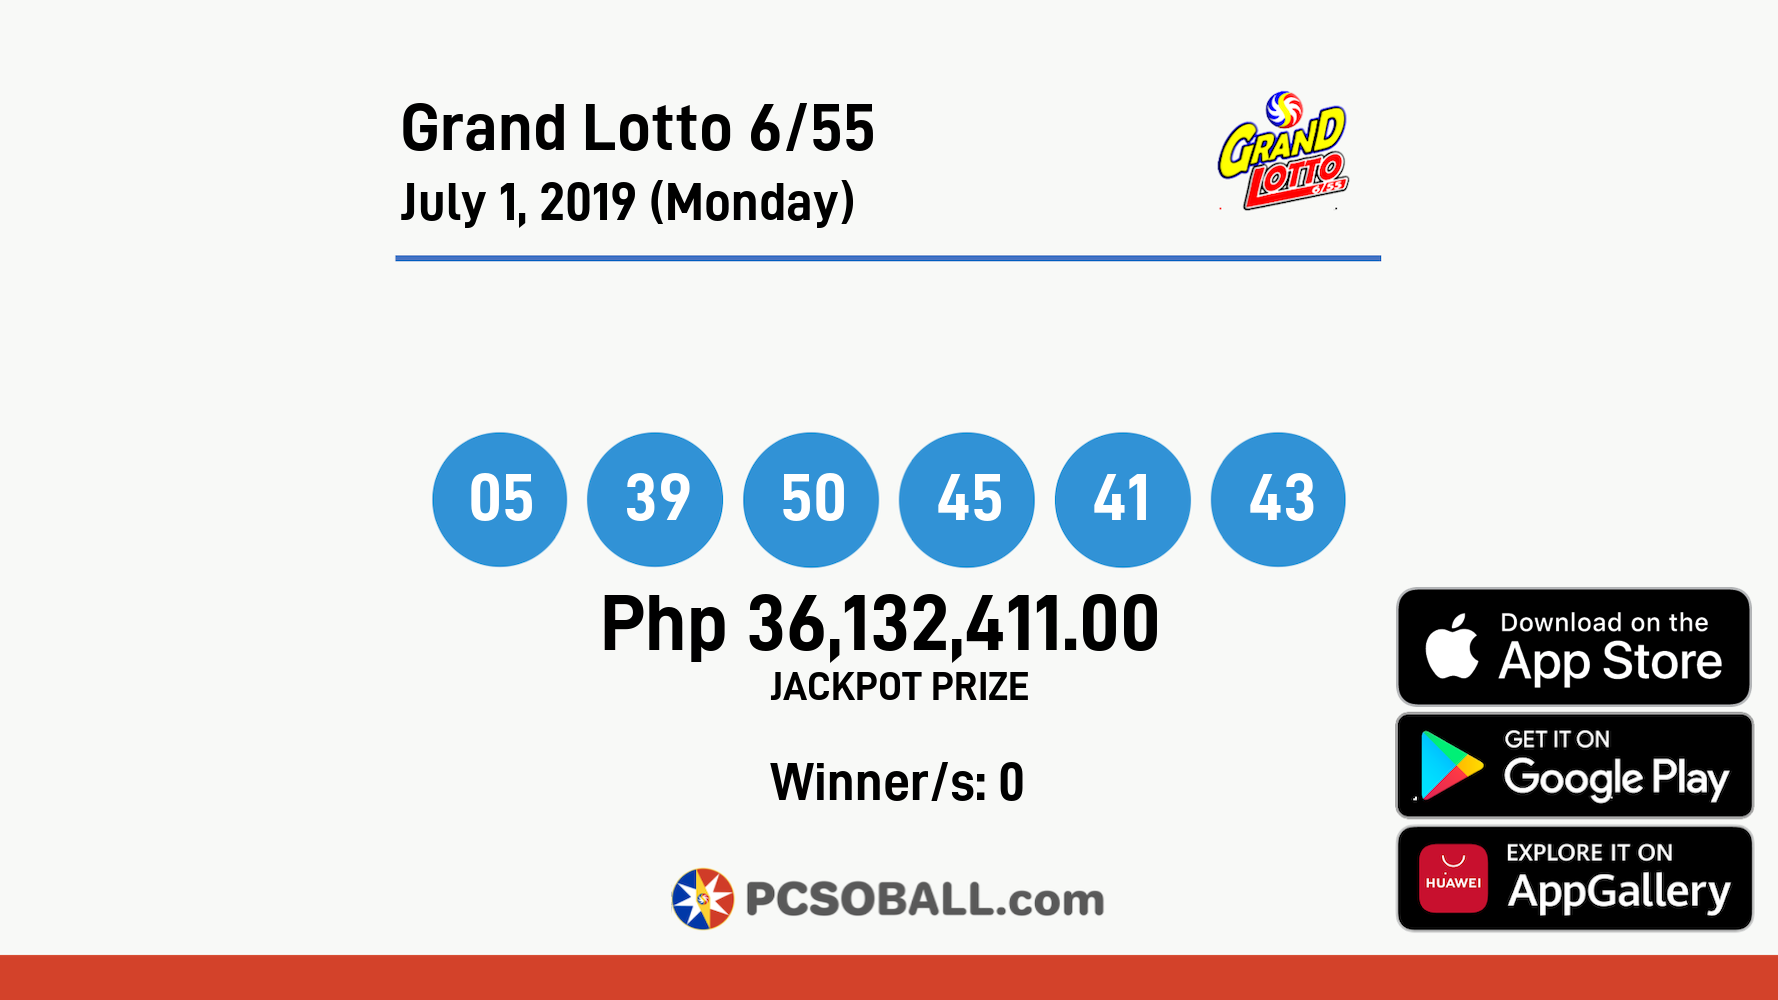 Grand Lotto 6/55 July 1, 2019 (Monday) Result